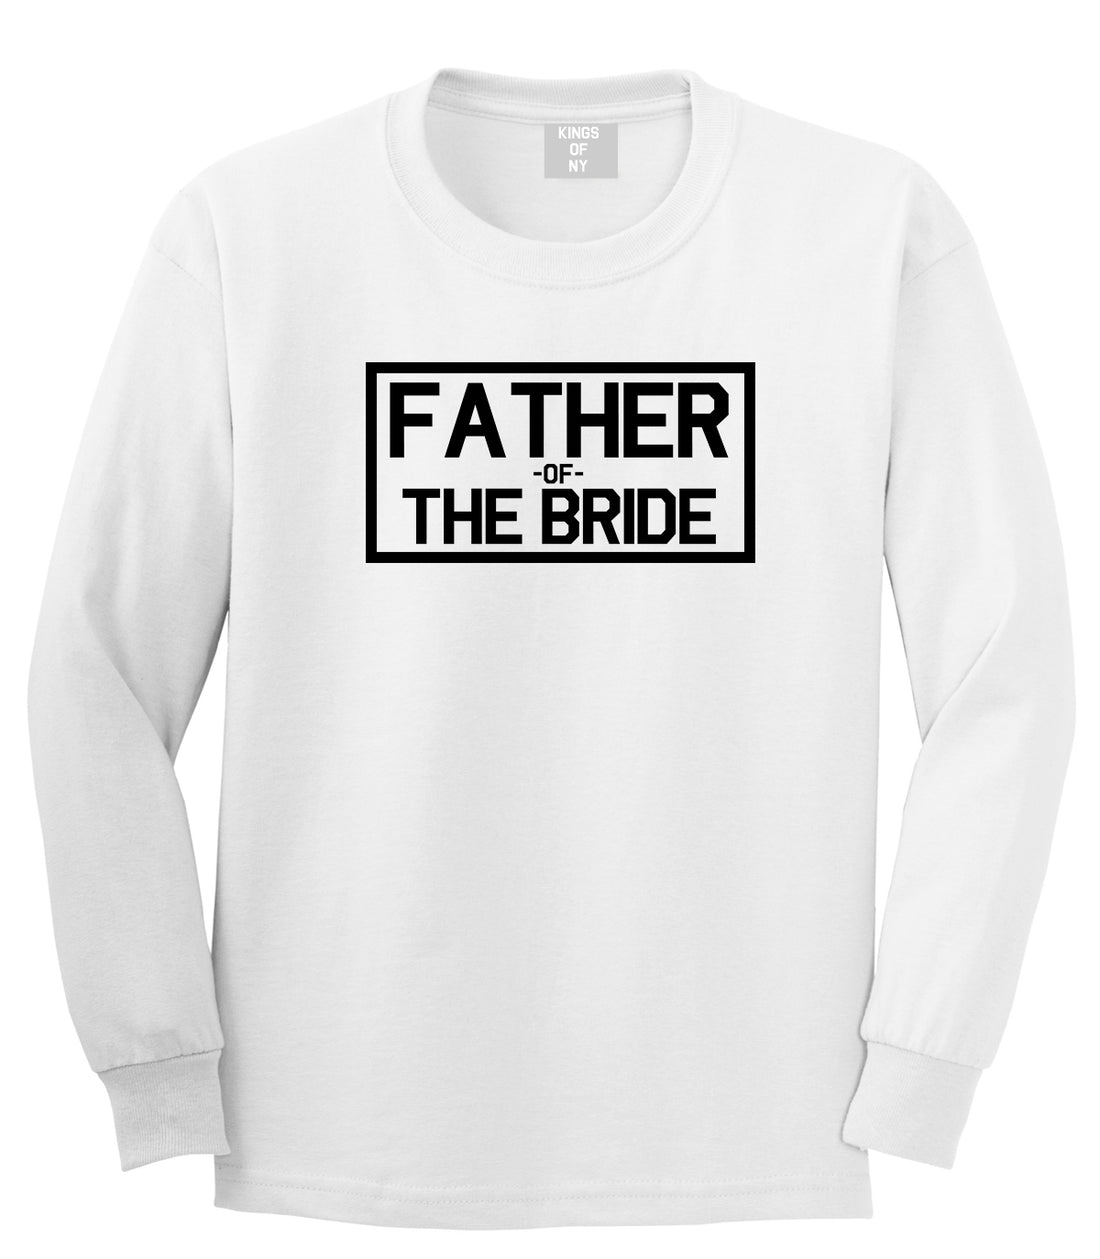 Father Of The Bride Mens White Long Sleeve T-Shirt by Kings Of NY